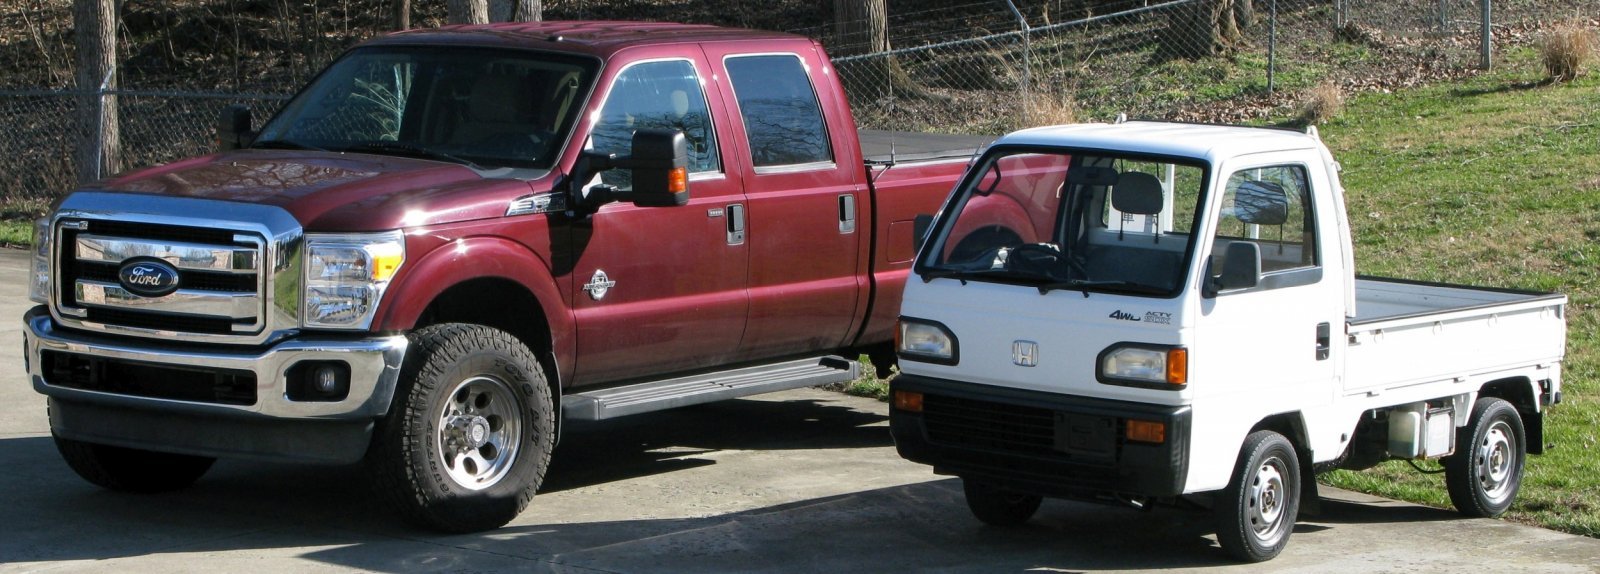 ACTY_and_F250.jpg